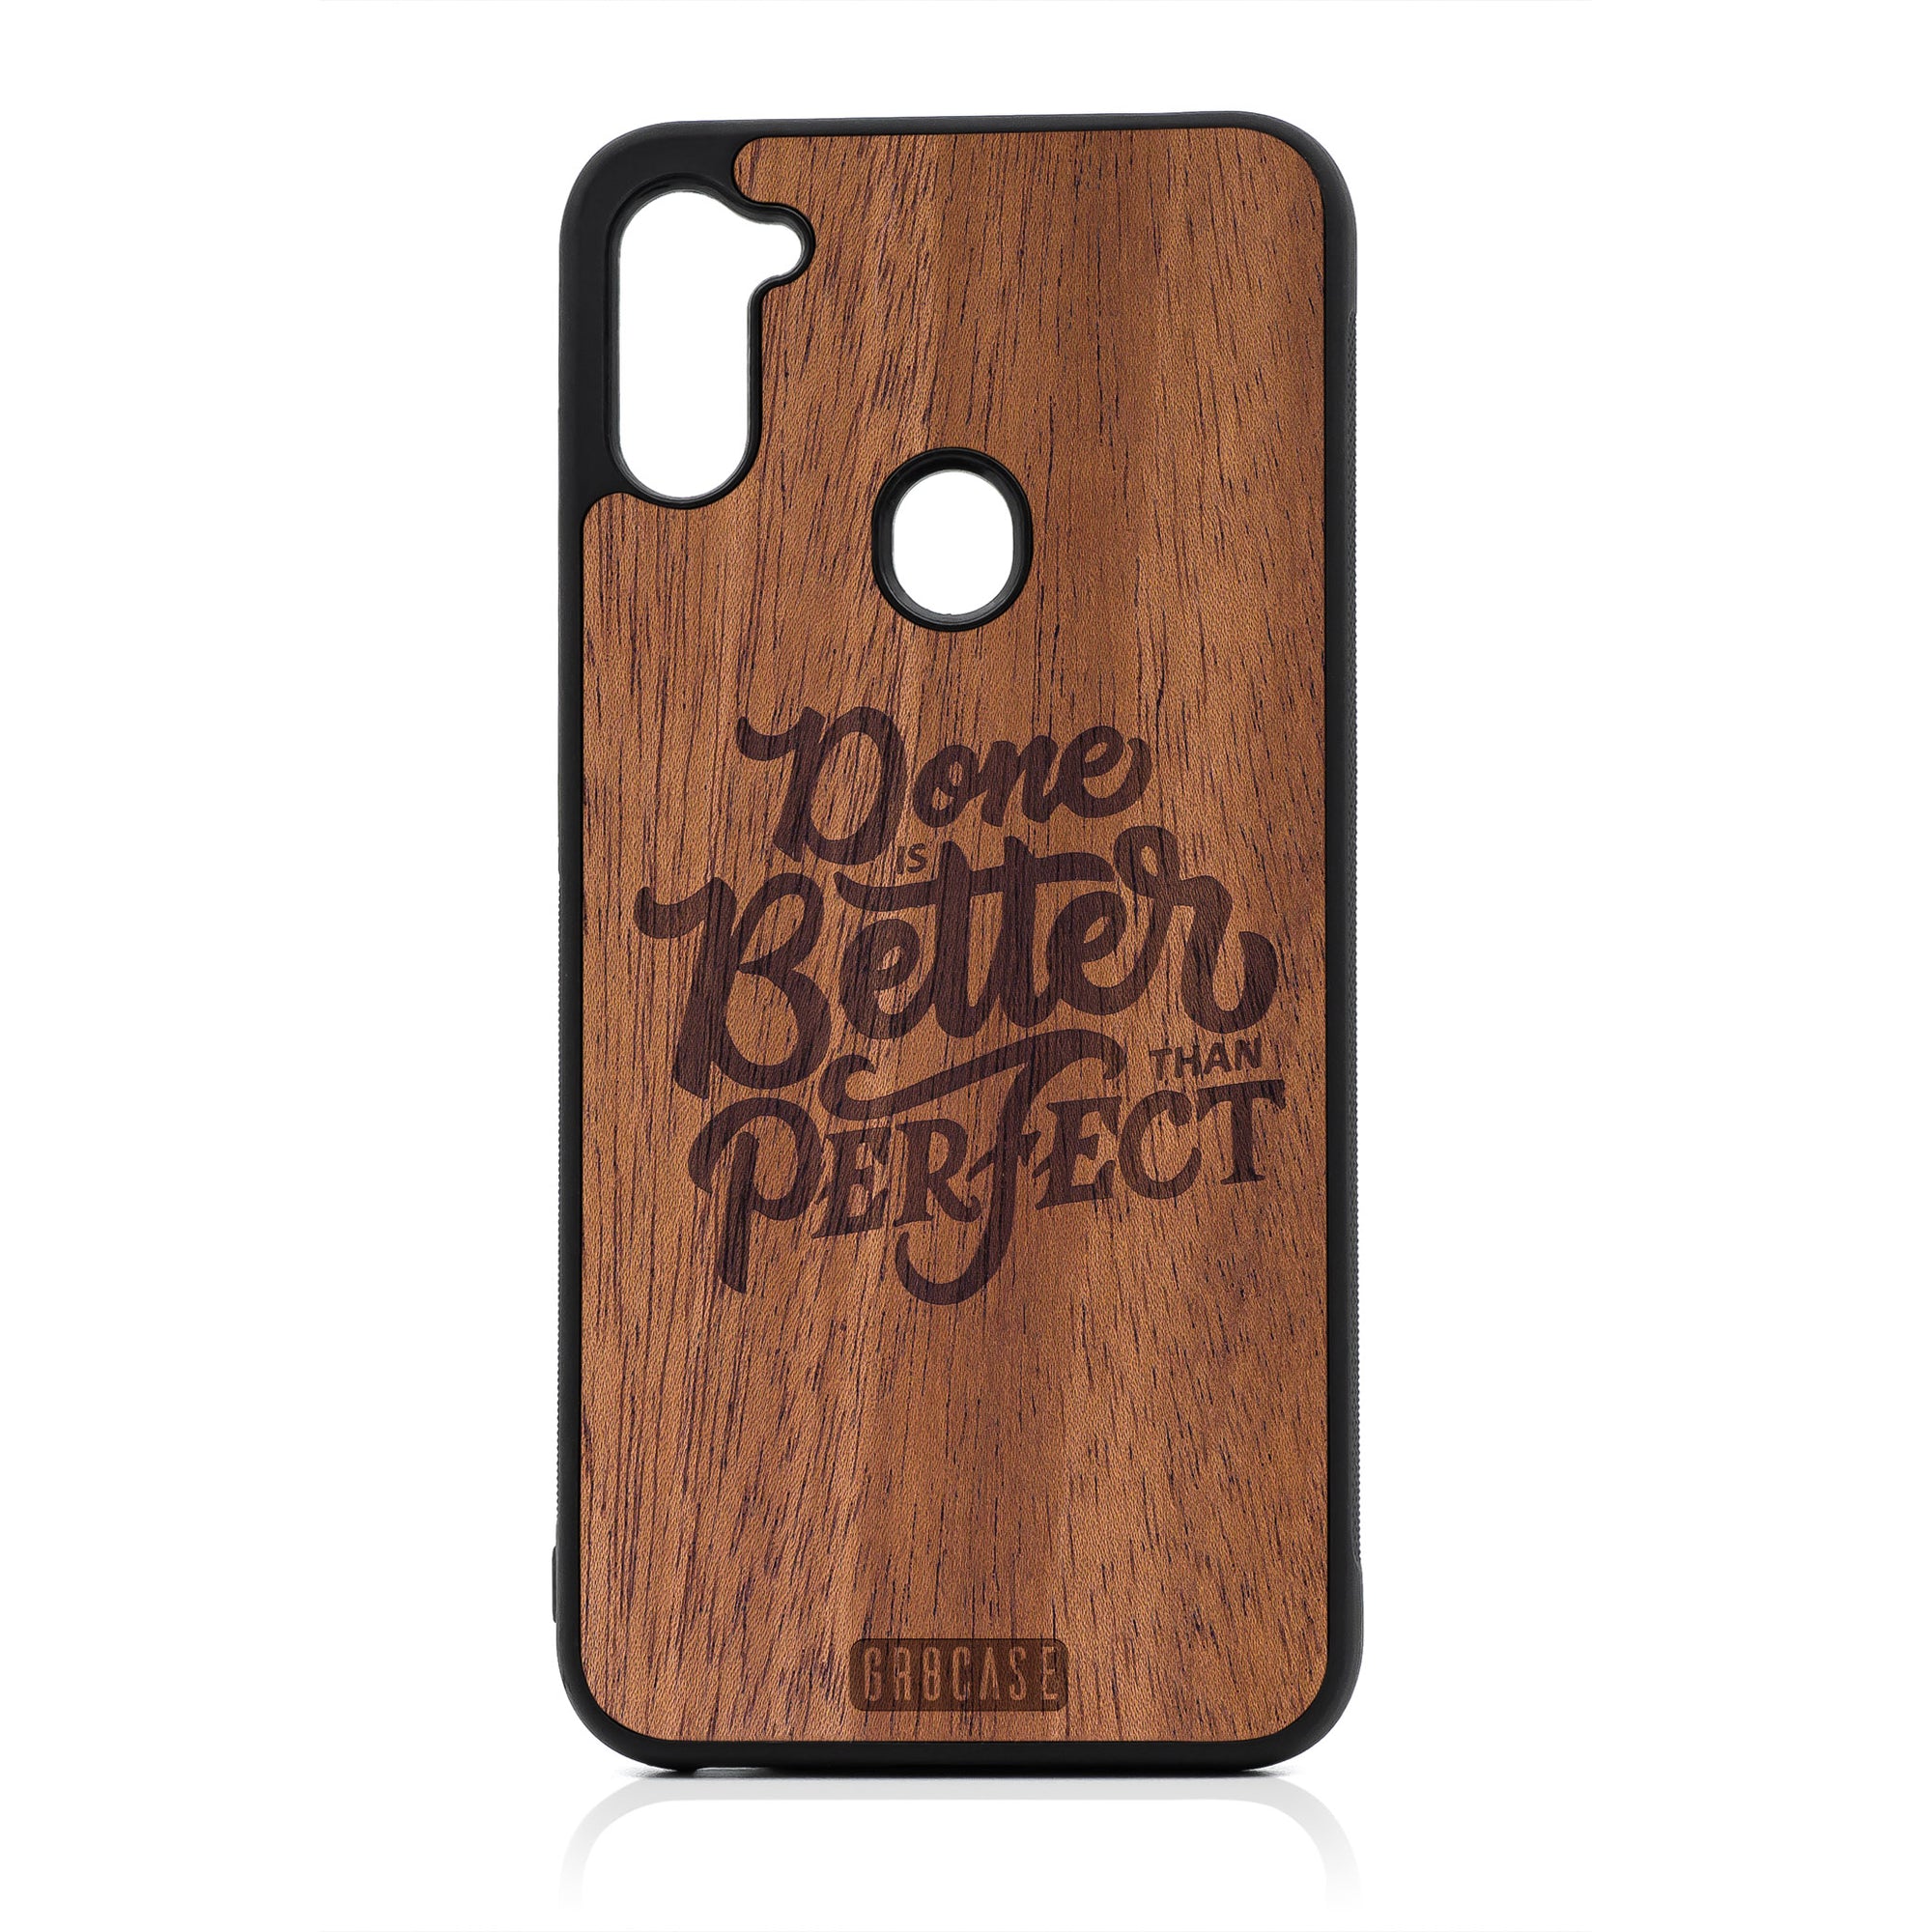 Done Is Better Than Perfect Design Wood Case For Samsung Galaxy A11